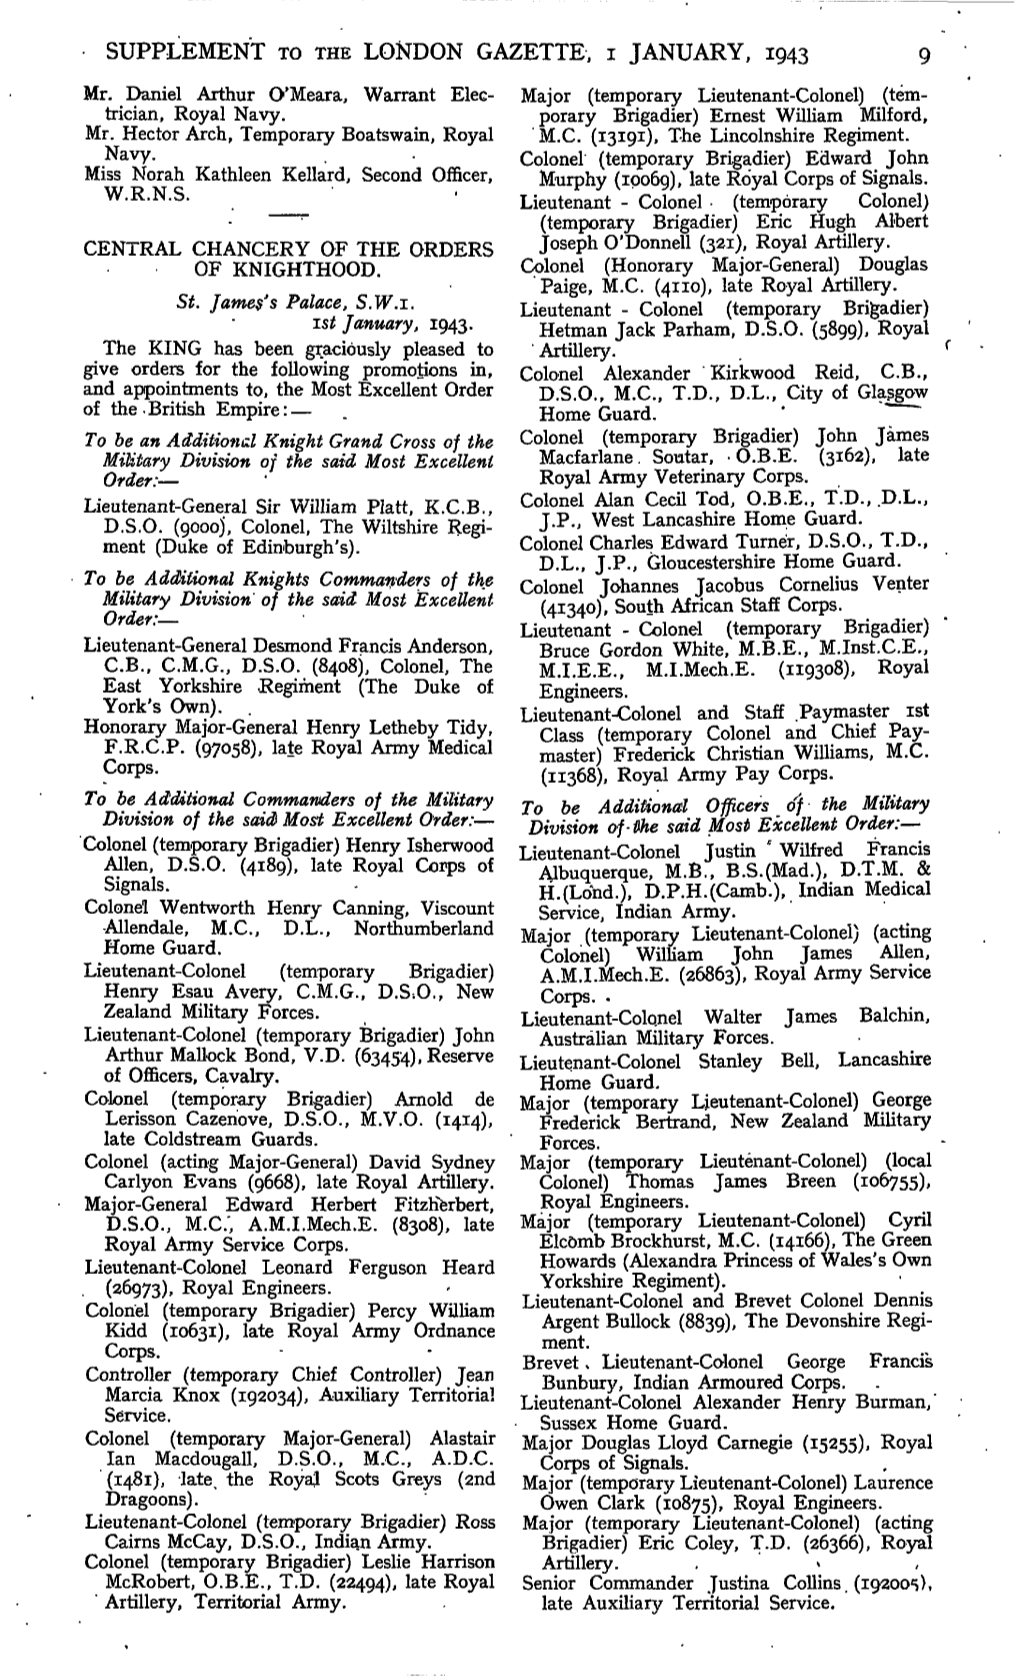 SUPPLEMENT to the LONDON GAZETTE, I JANUARY, 1943 Mr